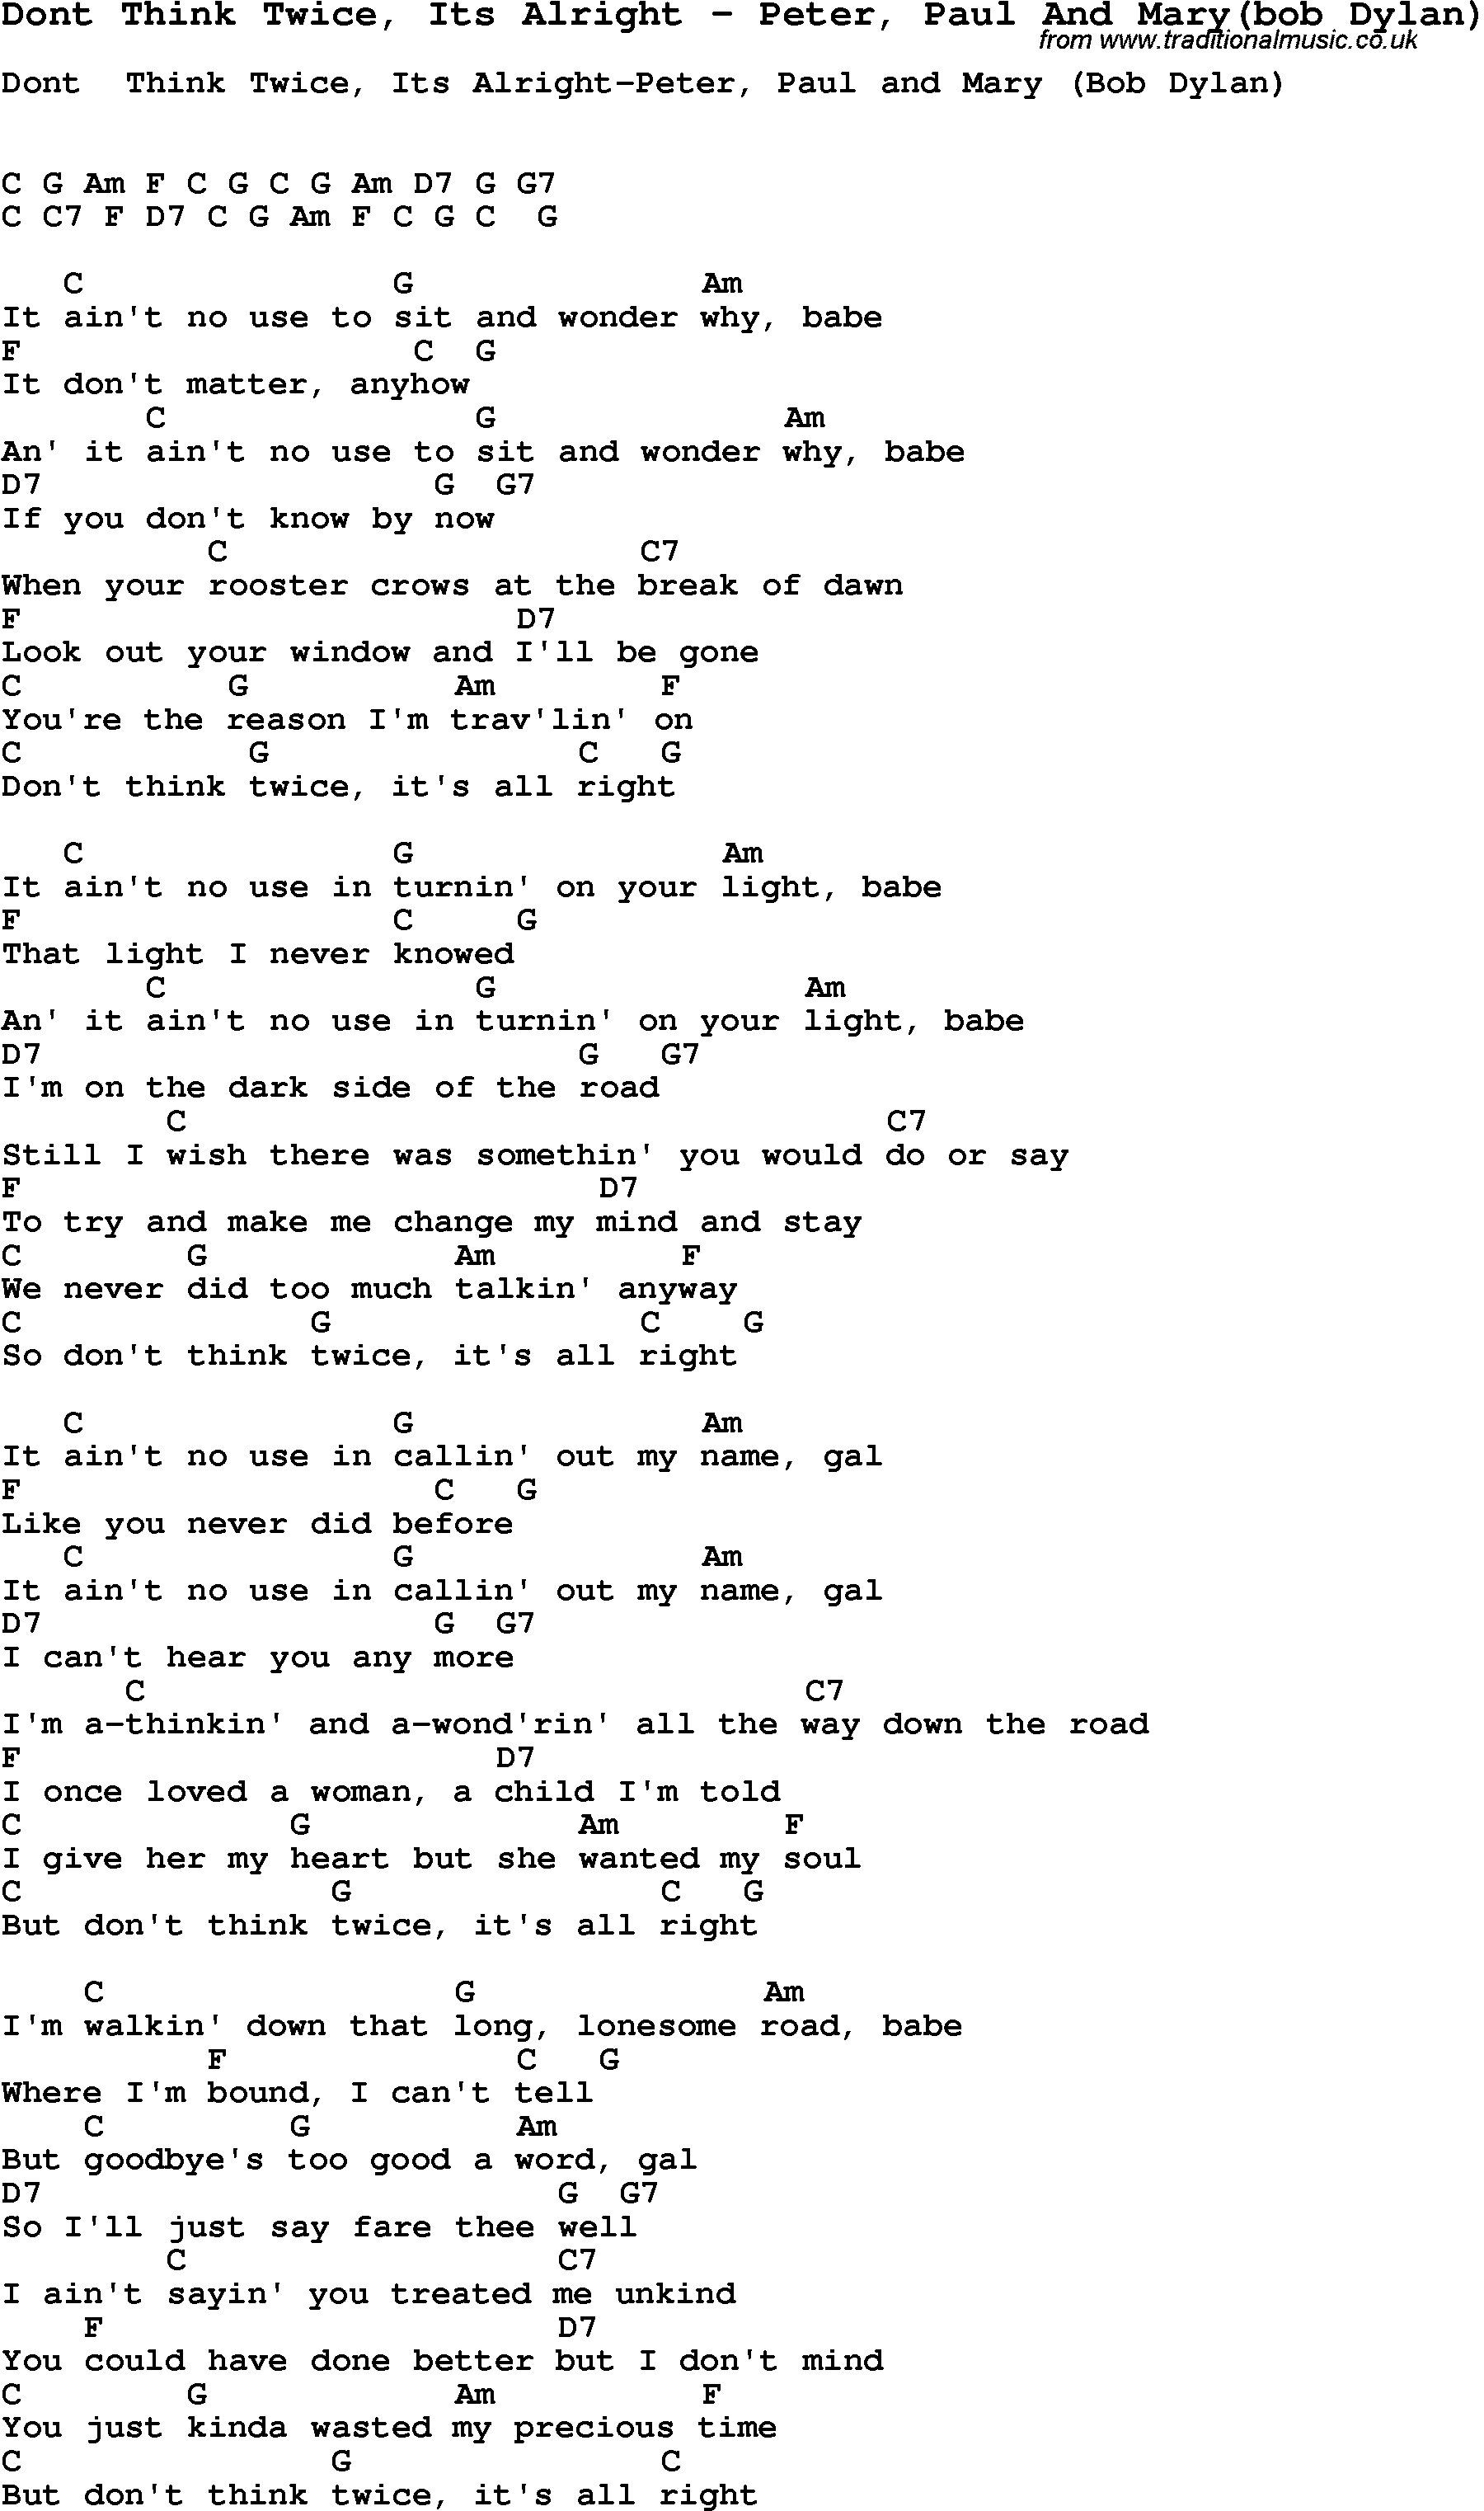 Song Dont Think Twice, Its Alright by Peter, Paul And Mary(bob Dylan), with lyrics for vocal performance and accompaniment chords for Ukulele, Guitar Banjo etc.